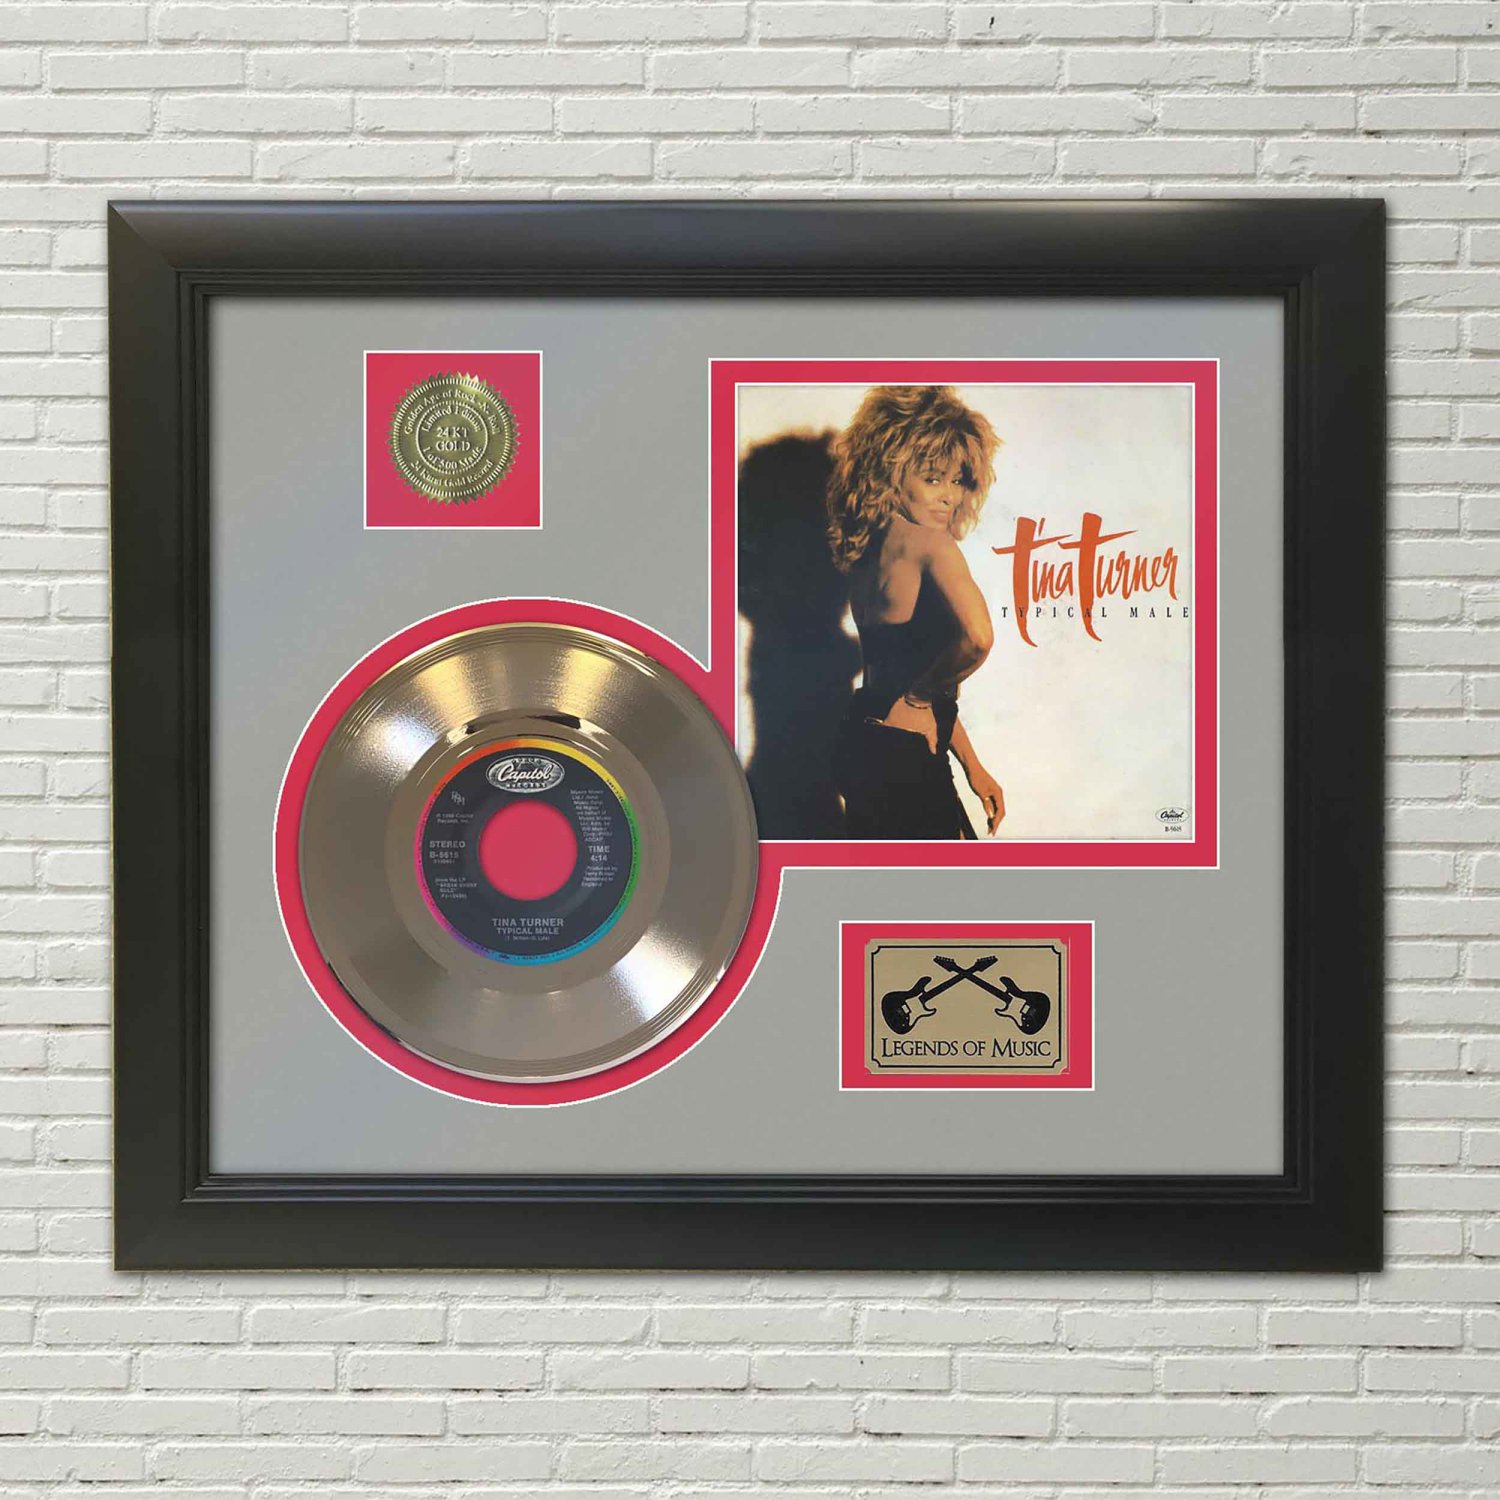 TINA TURNER "Typical Male"  Framed Picture Sleeve Gold 45 Record Display